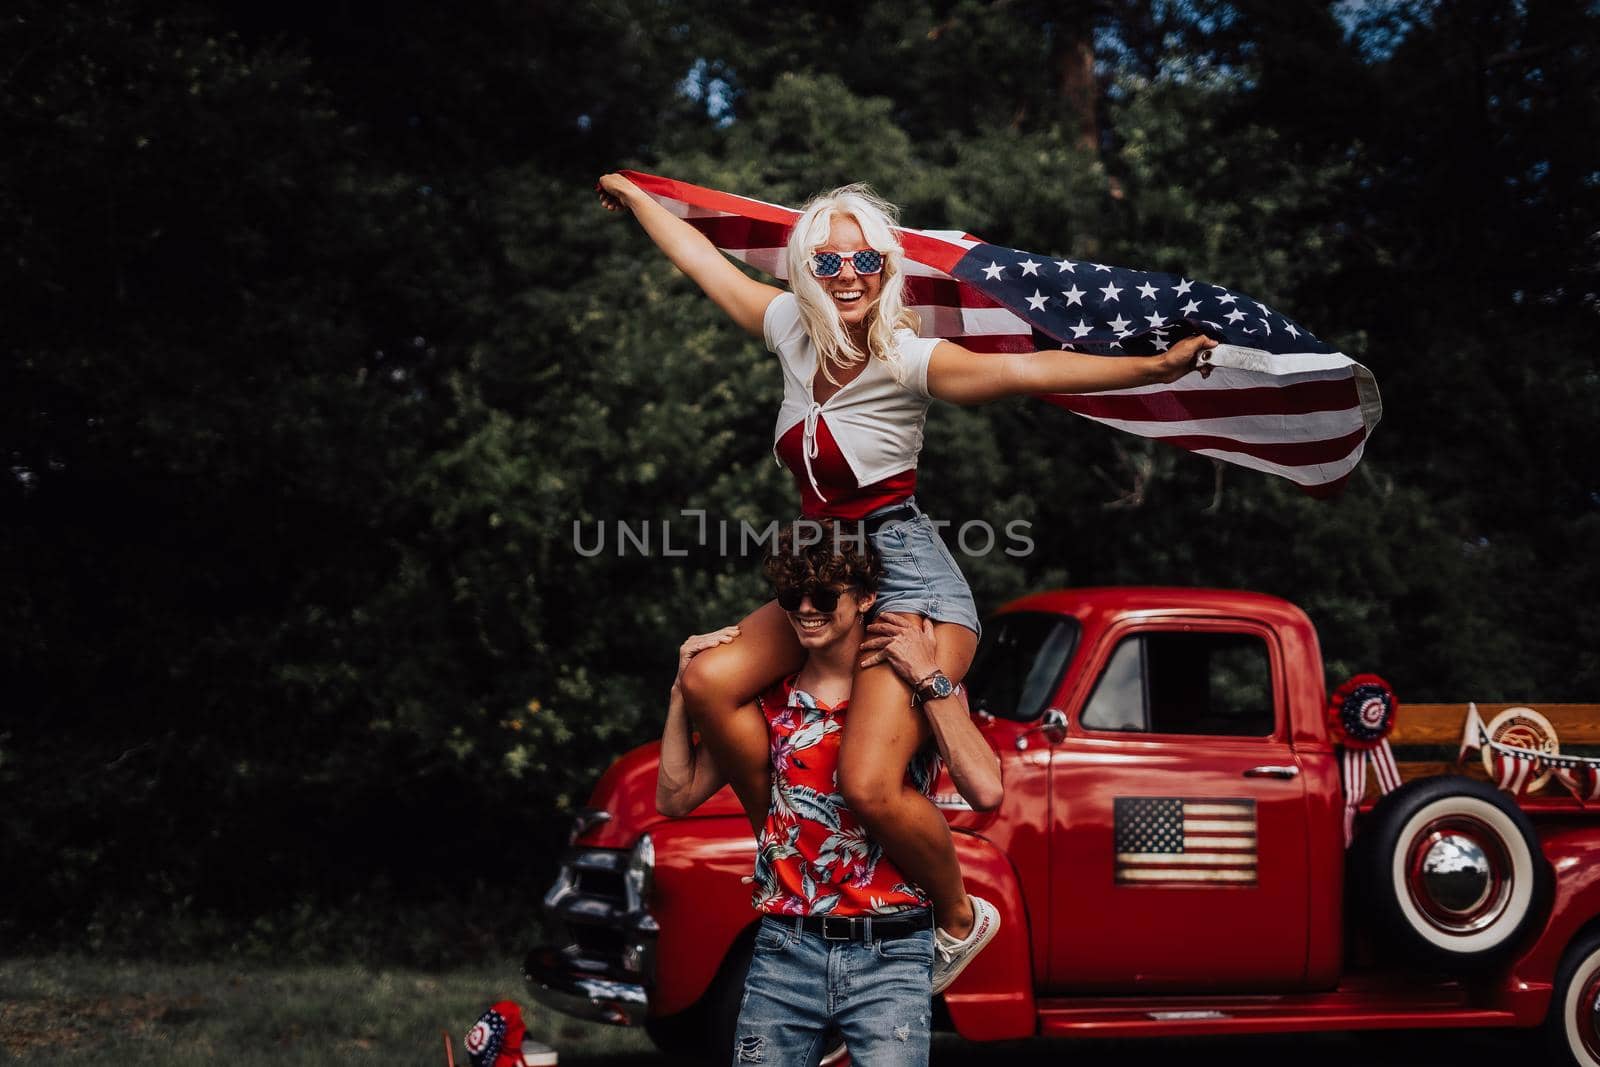 Couple in a vintage red truck